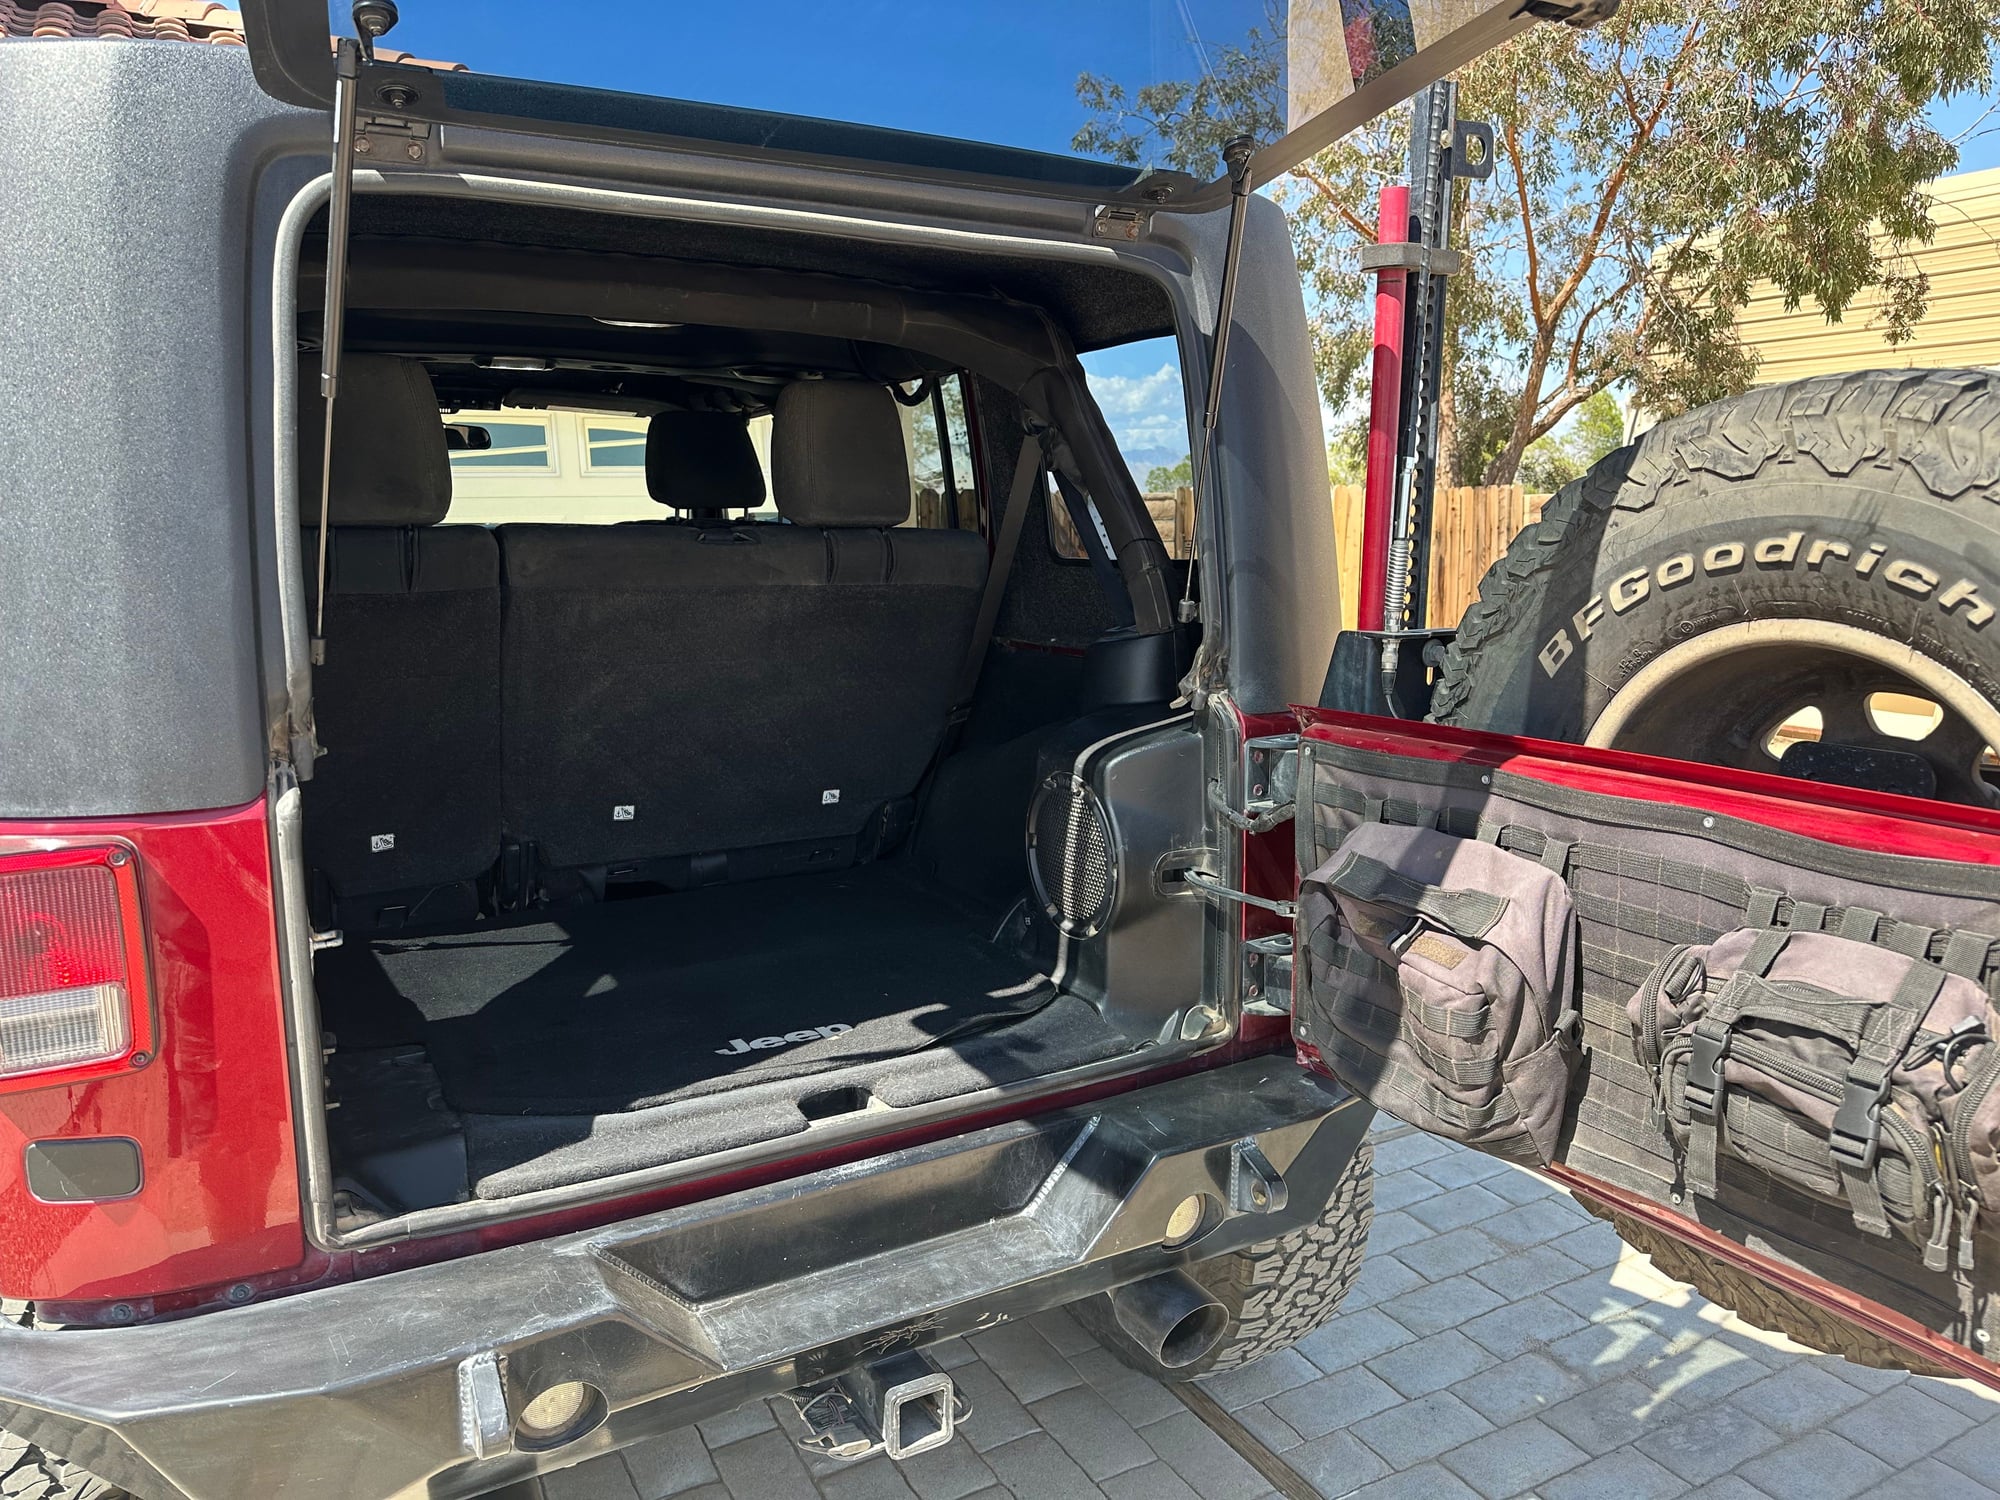 2012 Jeep Wrangler - 2012 JEEP Wrangler Rubicon Unlimited - Used - VIN 1C4HJWFG4CL276739 - 130,300 Miles - 6 cyl - 4WD - Automatic - SUV - Other - Ridgecrest, CA 93555, United States